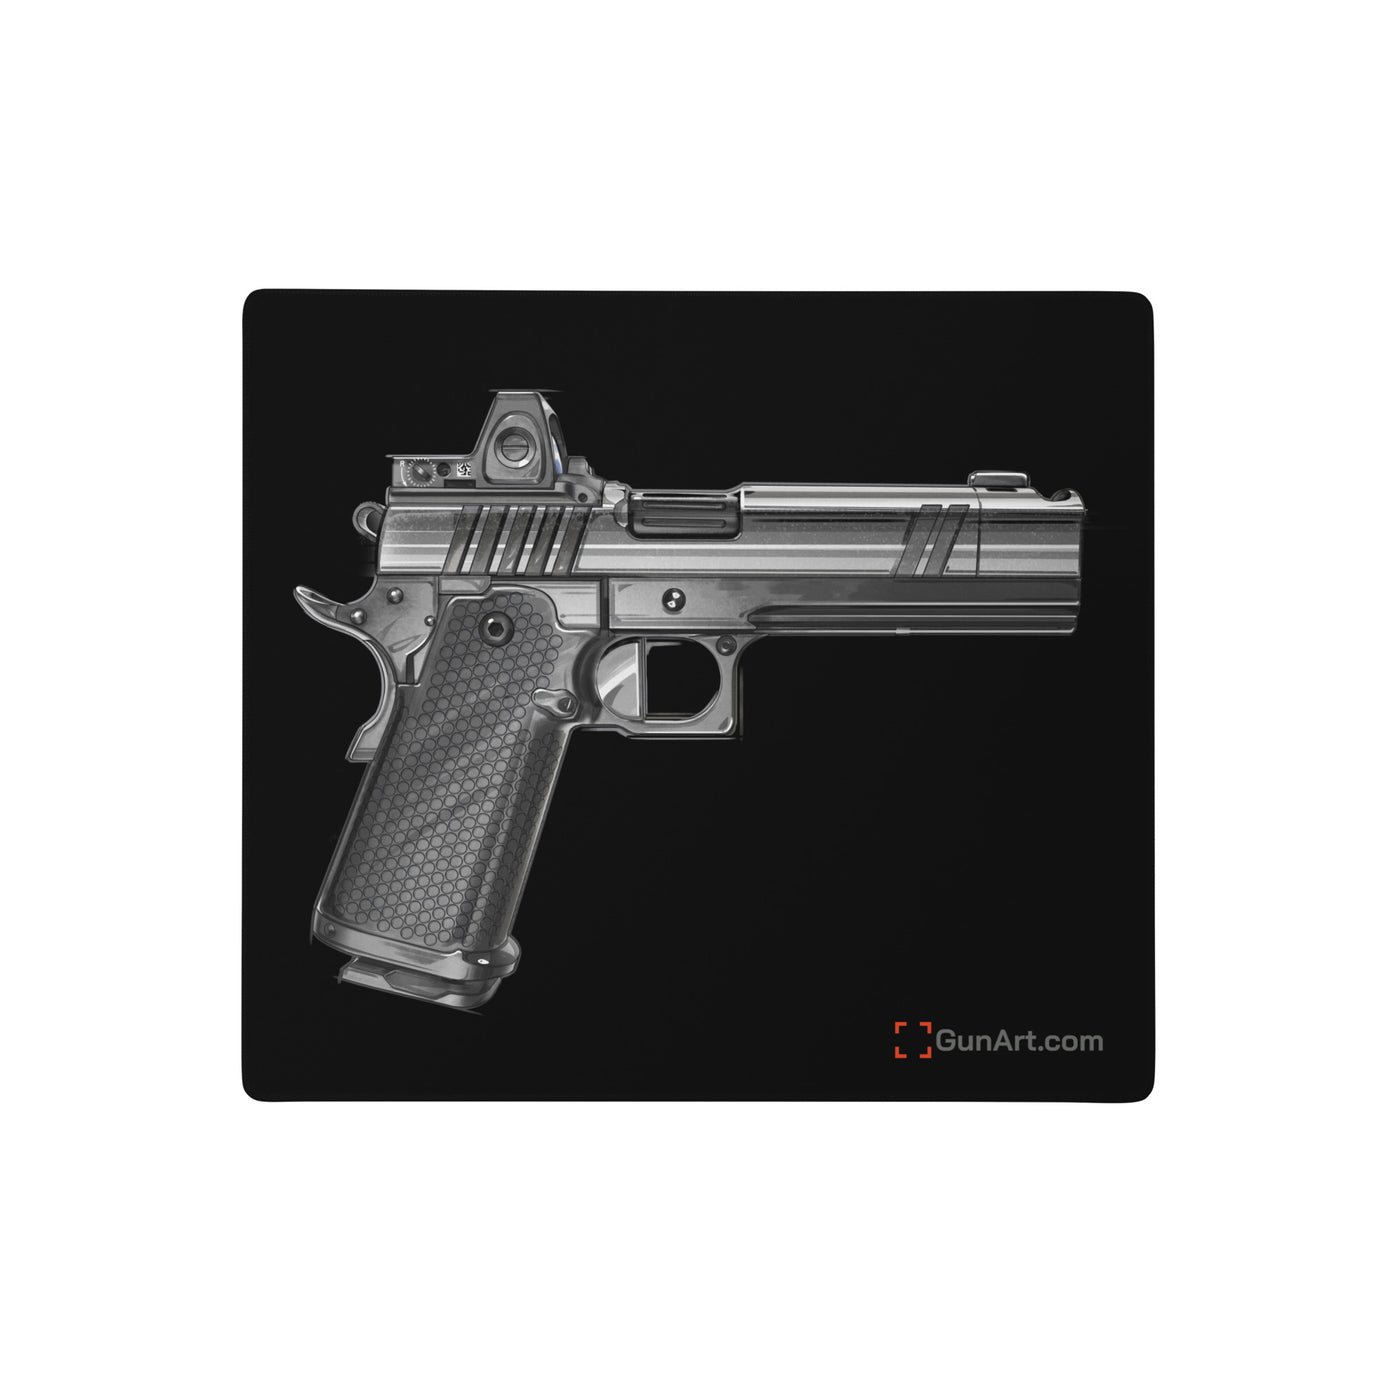 2011 Black & White Gaming Mouse Pad - Just The Piece - Black Background